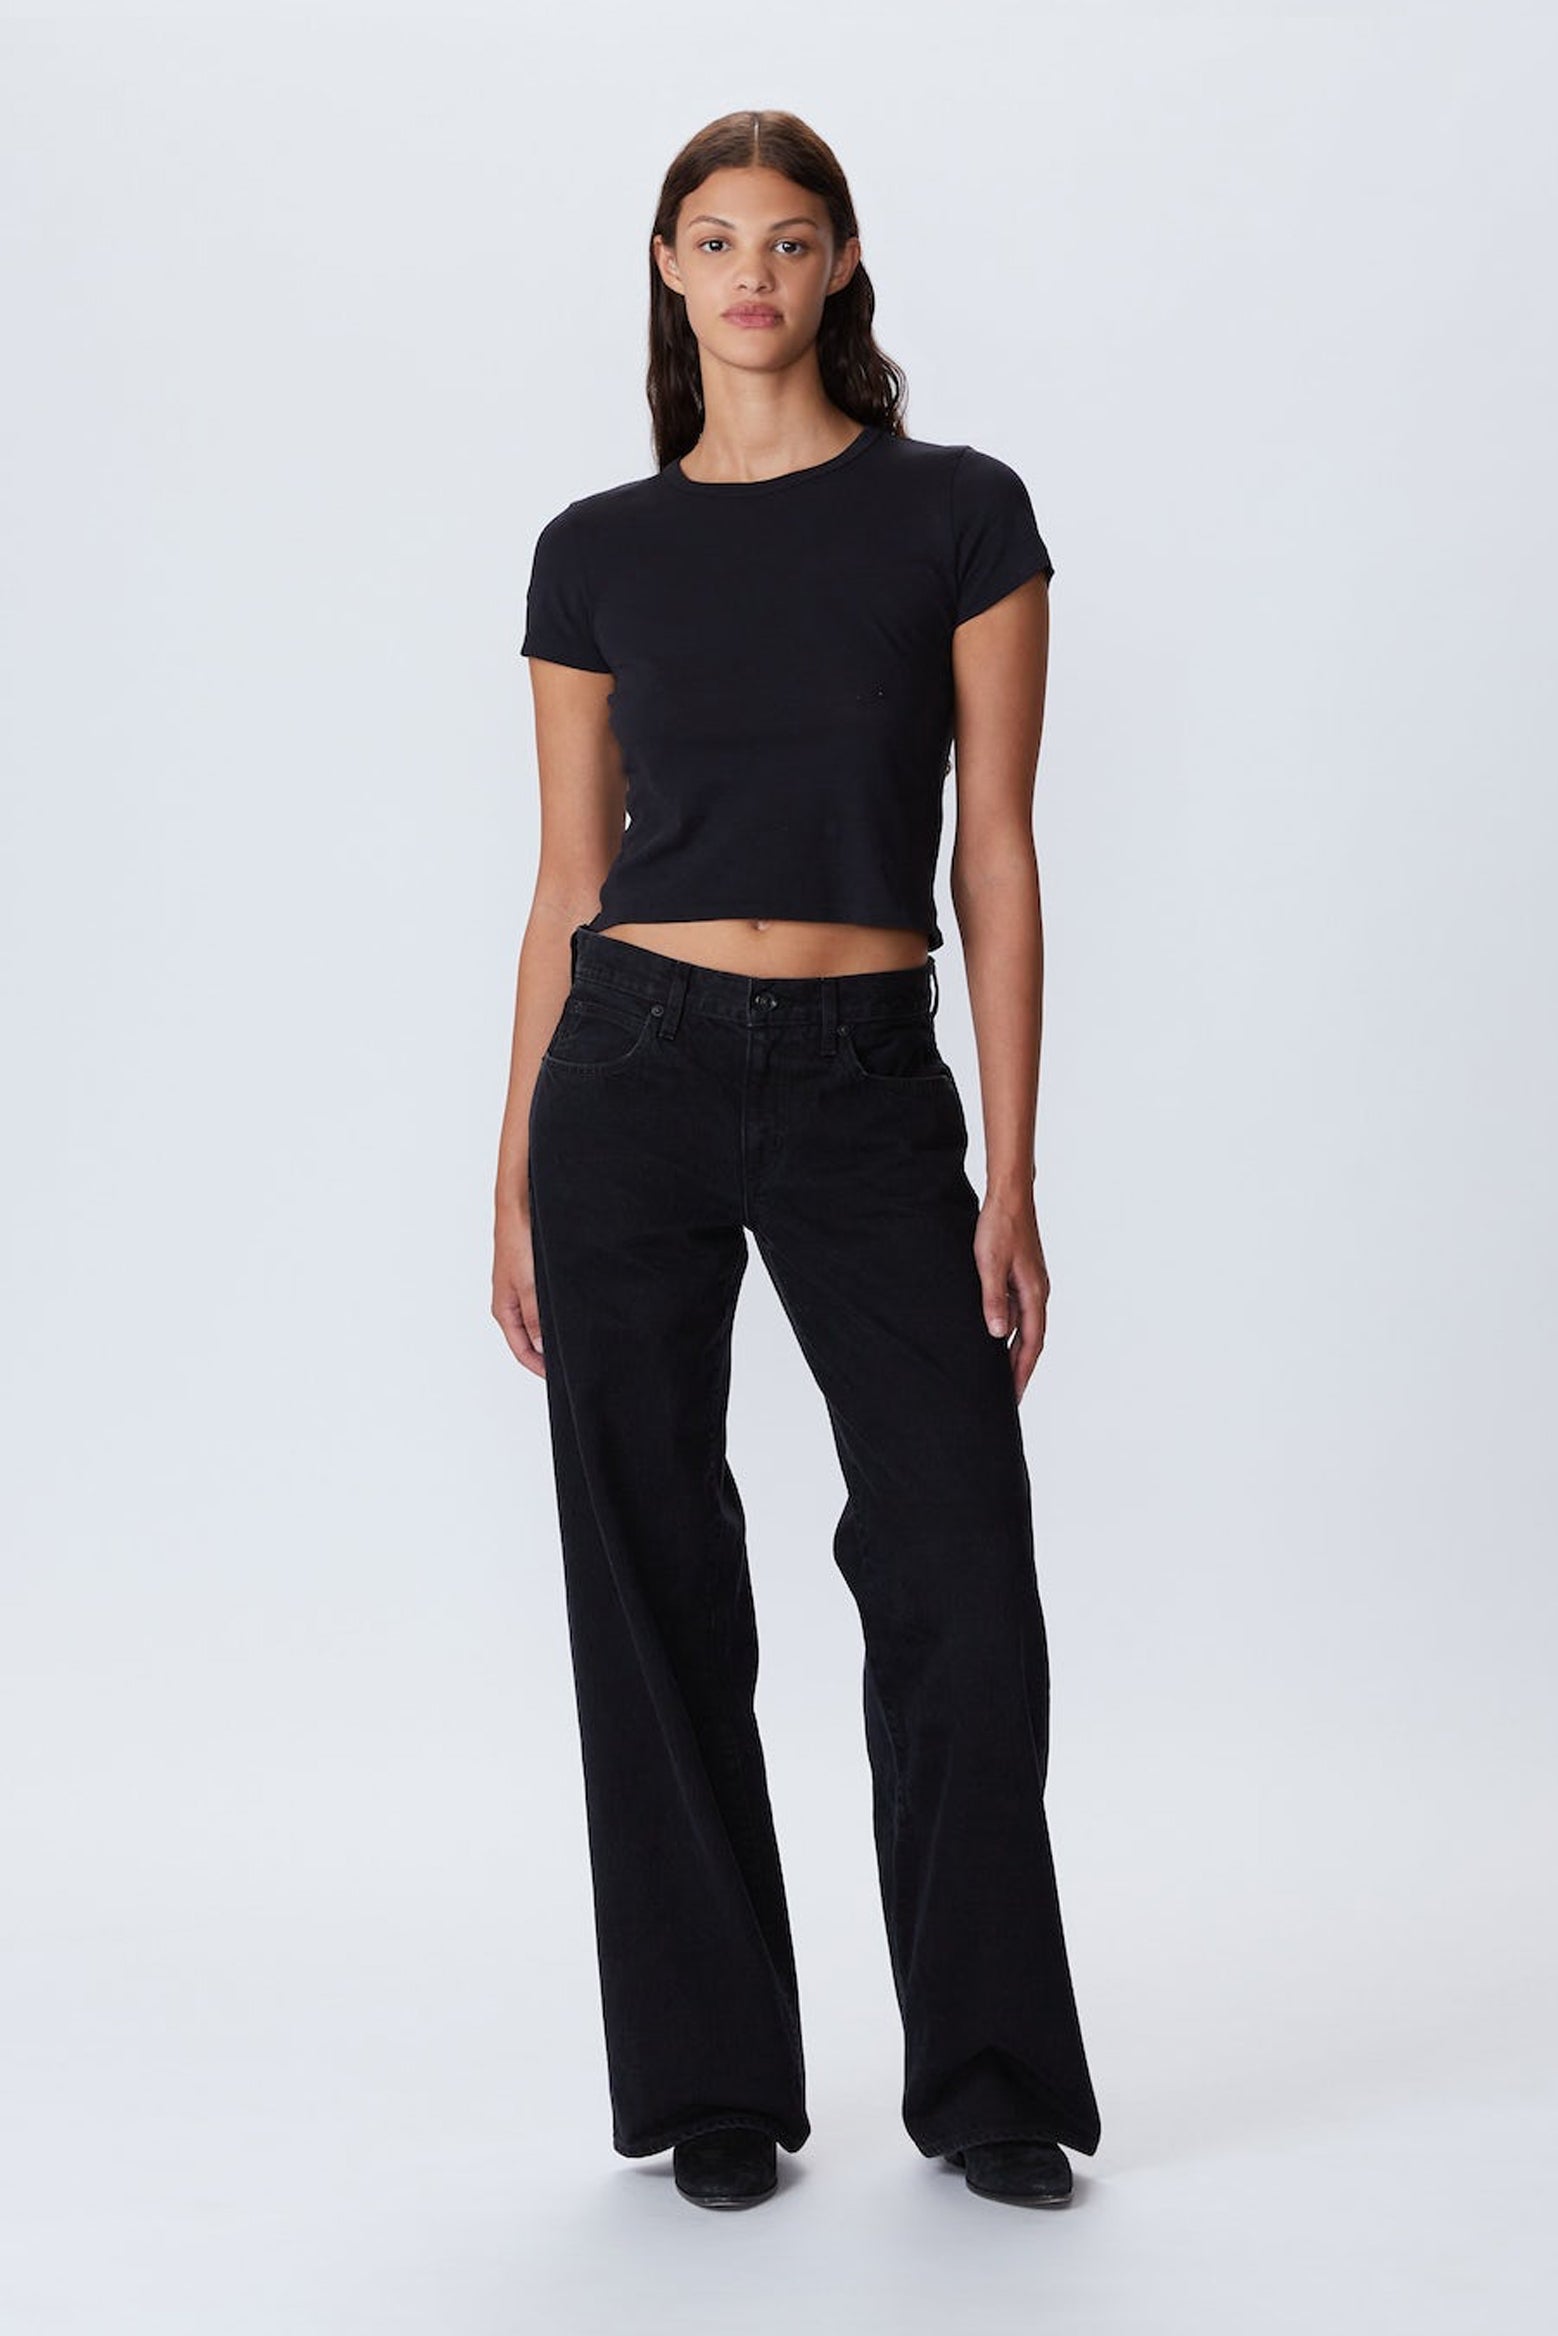 The SLVRLake Mica Low Rise Wide Leg Jean in Shadow Ridge available at The New Trend Australia